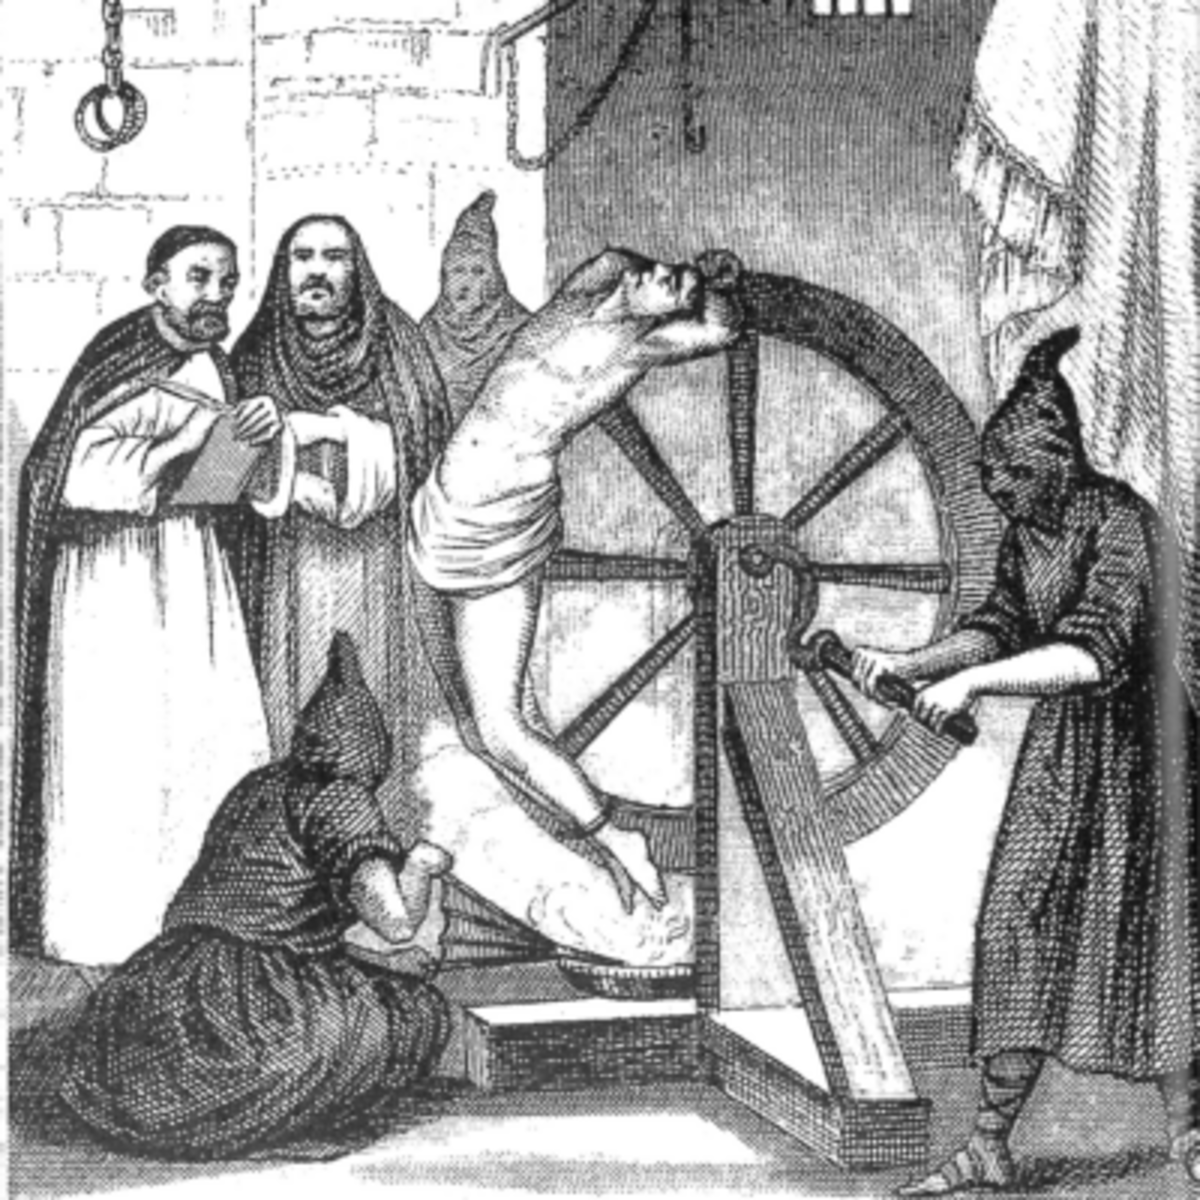 UNLIKE WATERBOARDING, TORTURE WAS TORTURE IN THE MIDDLE AGES AND CAUSED PERMANENT BODILY DAMAGE OR DEATH